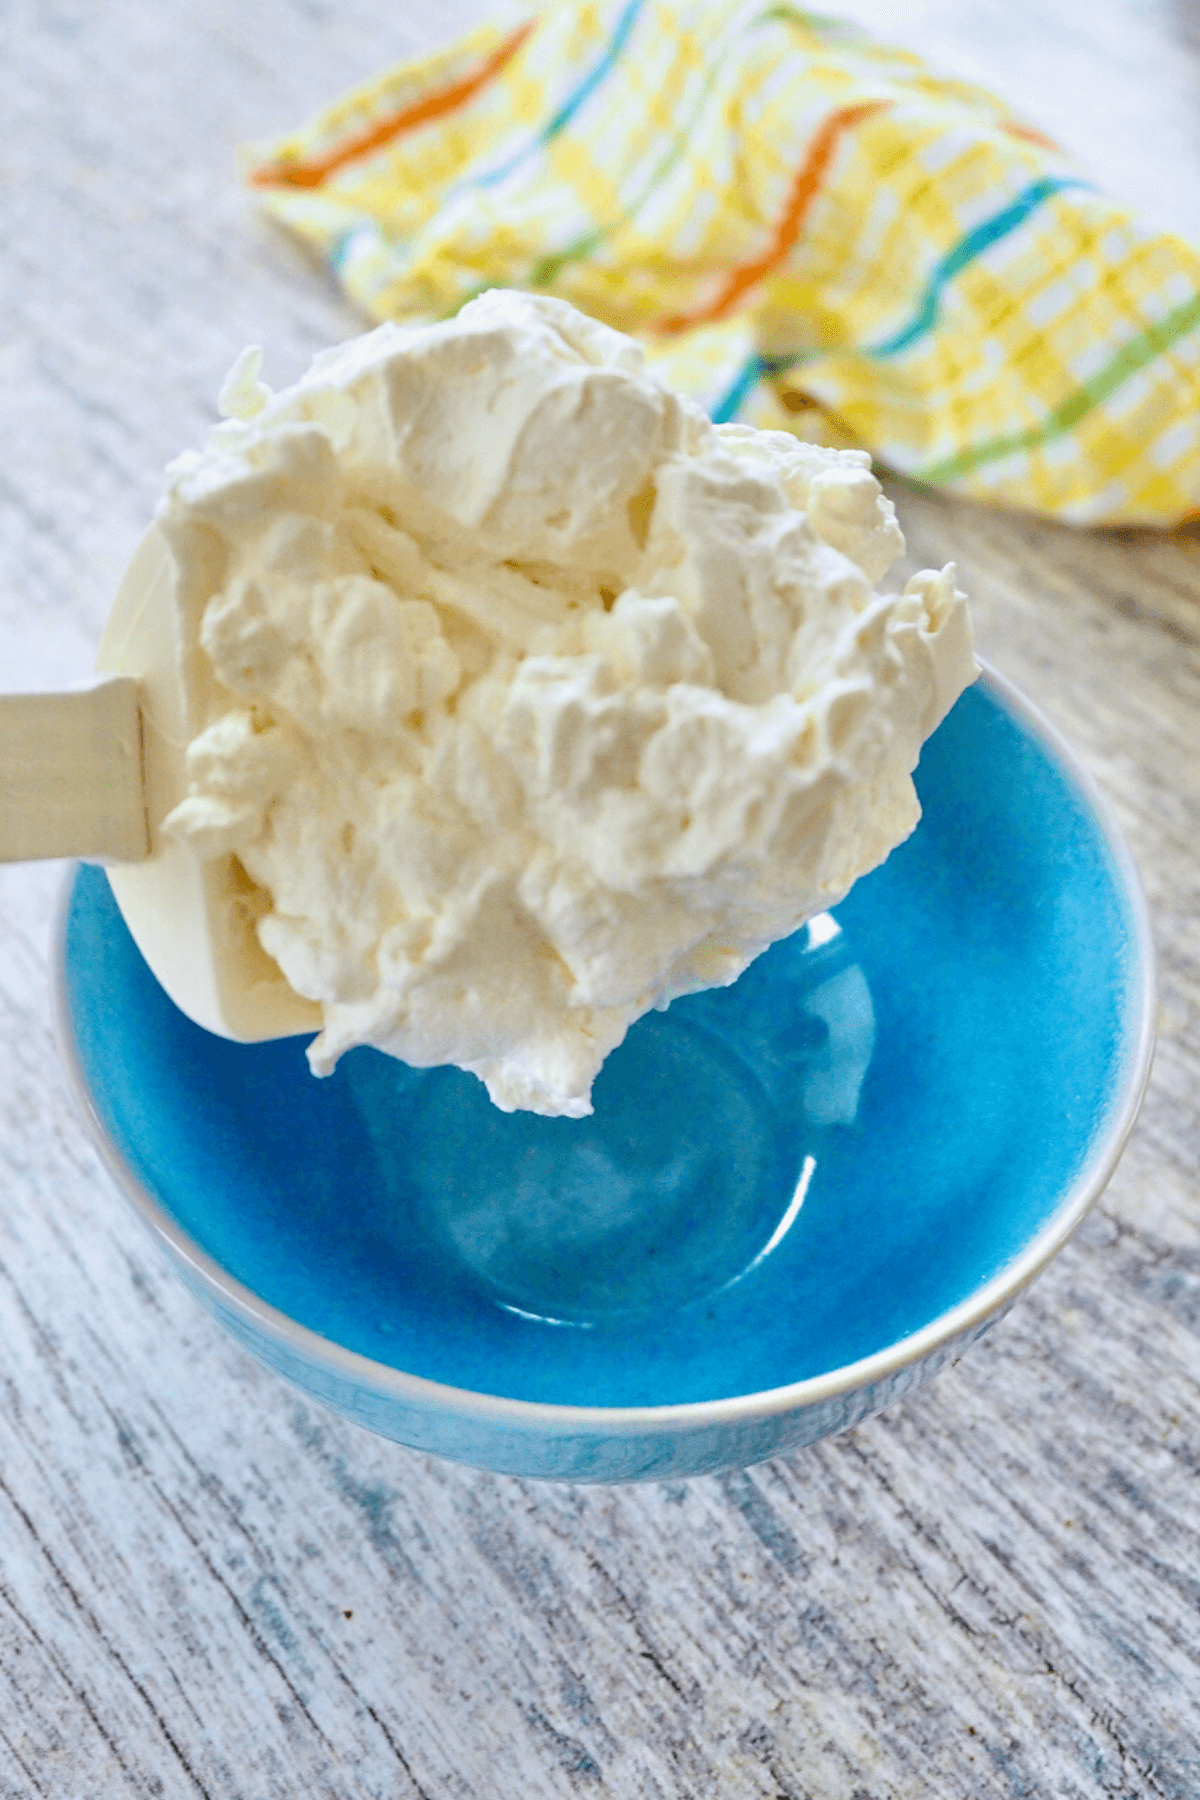 Spooning homemade whipped cream into blue bowl.